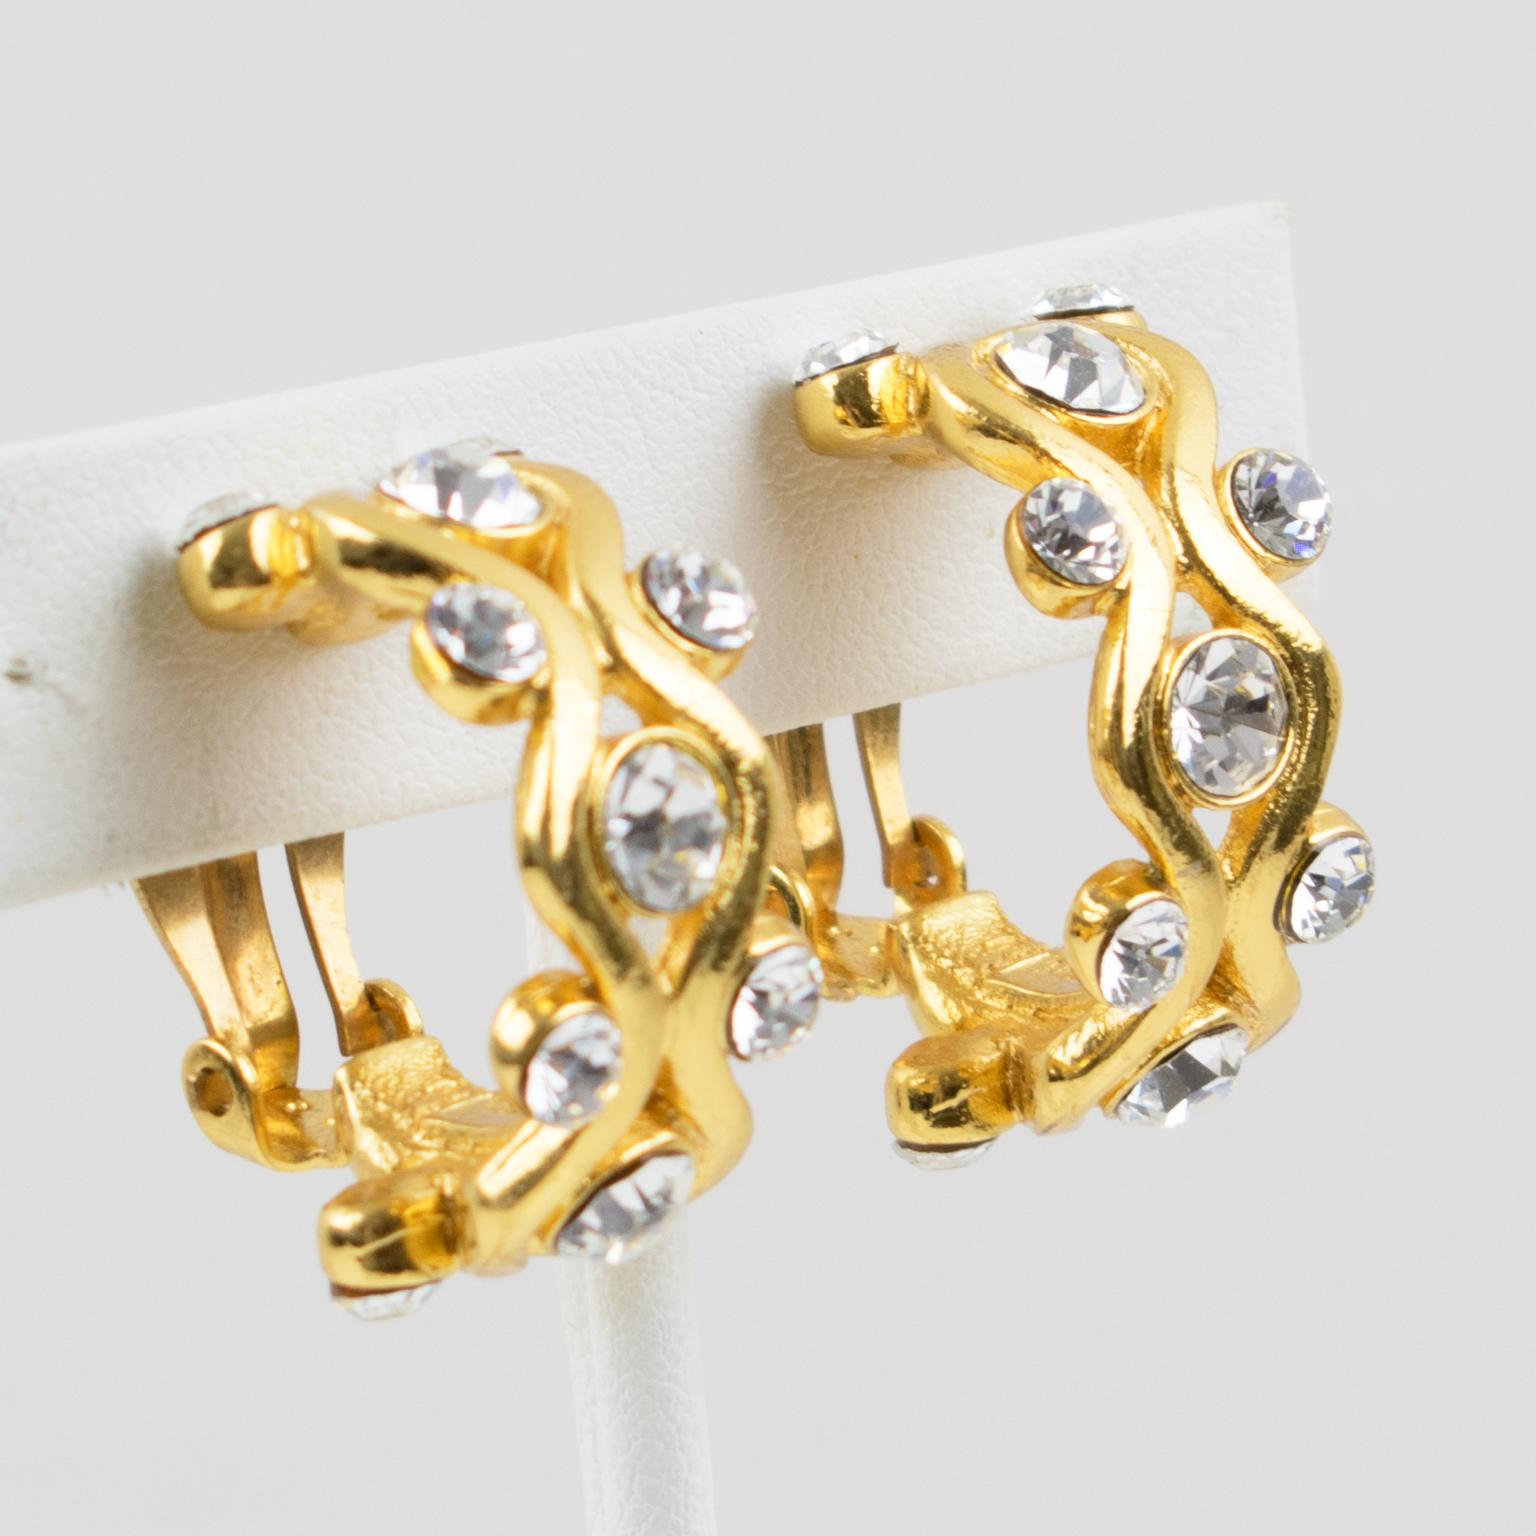 These adorable Yves Saint Laurent YSL Paris clip-on earrings feature a dimensional half-hoop shape with shiny gilt metal all carved and ornate with clear crystal rhinestones. The 